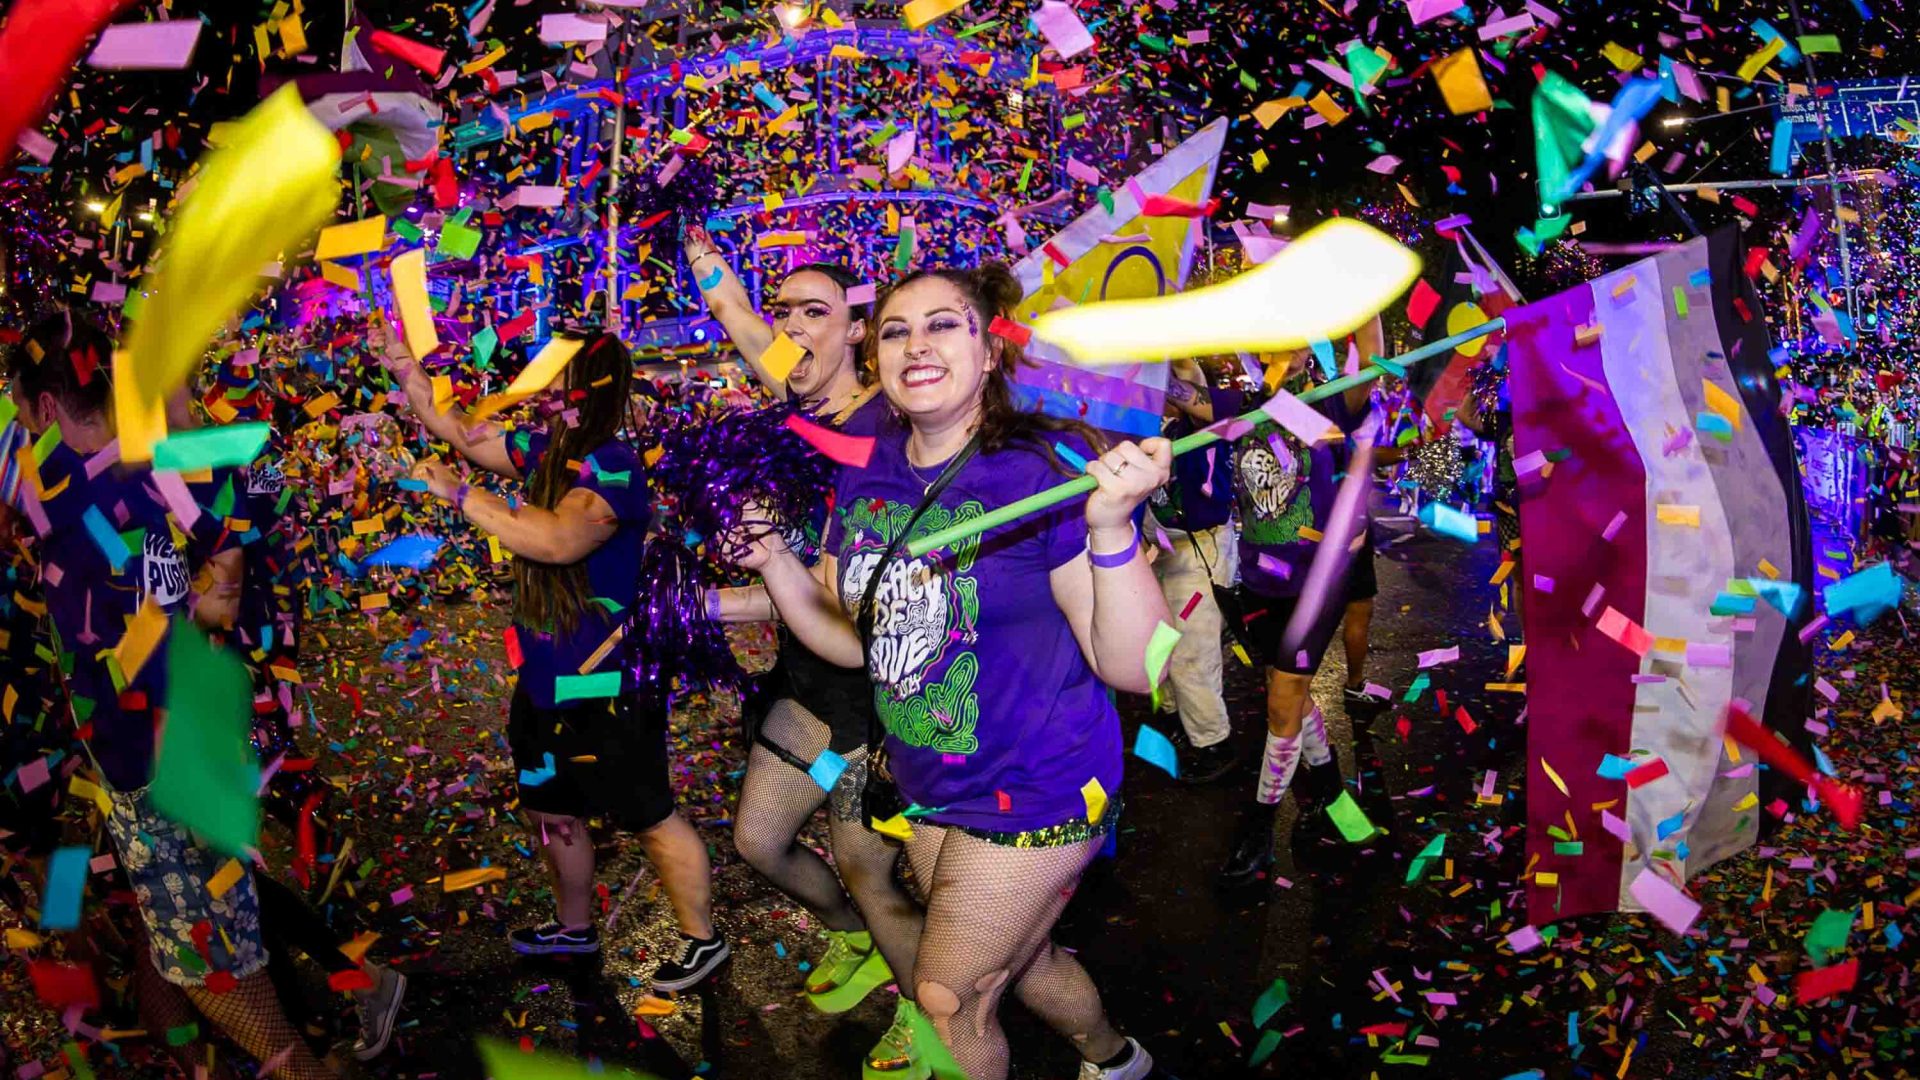 A group marches in the Sydney Mardi Gras, surrounded by confetti.